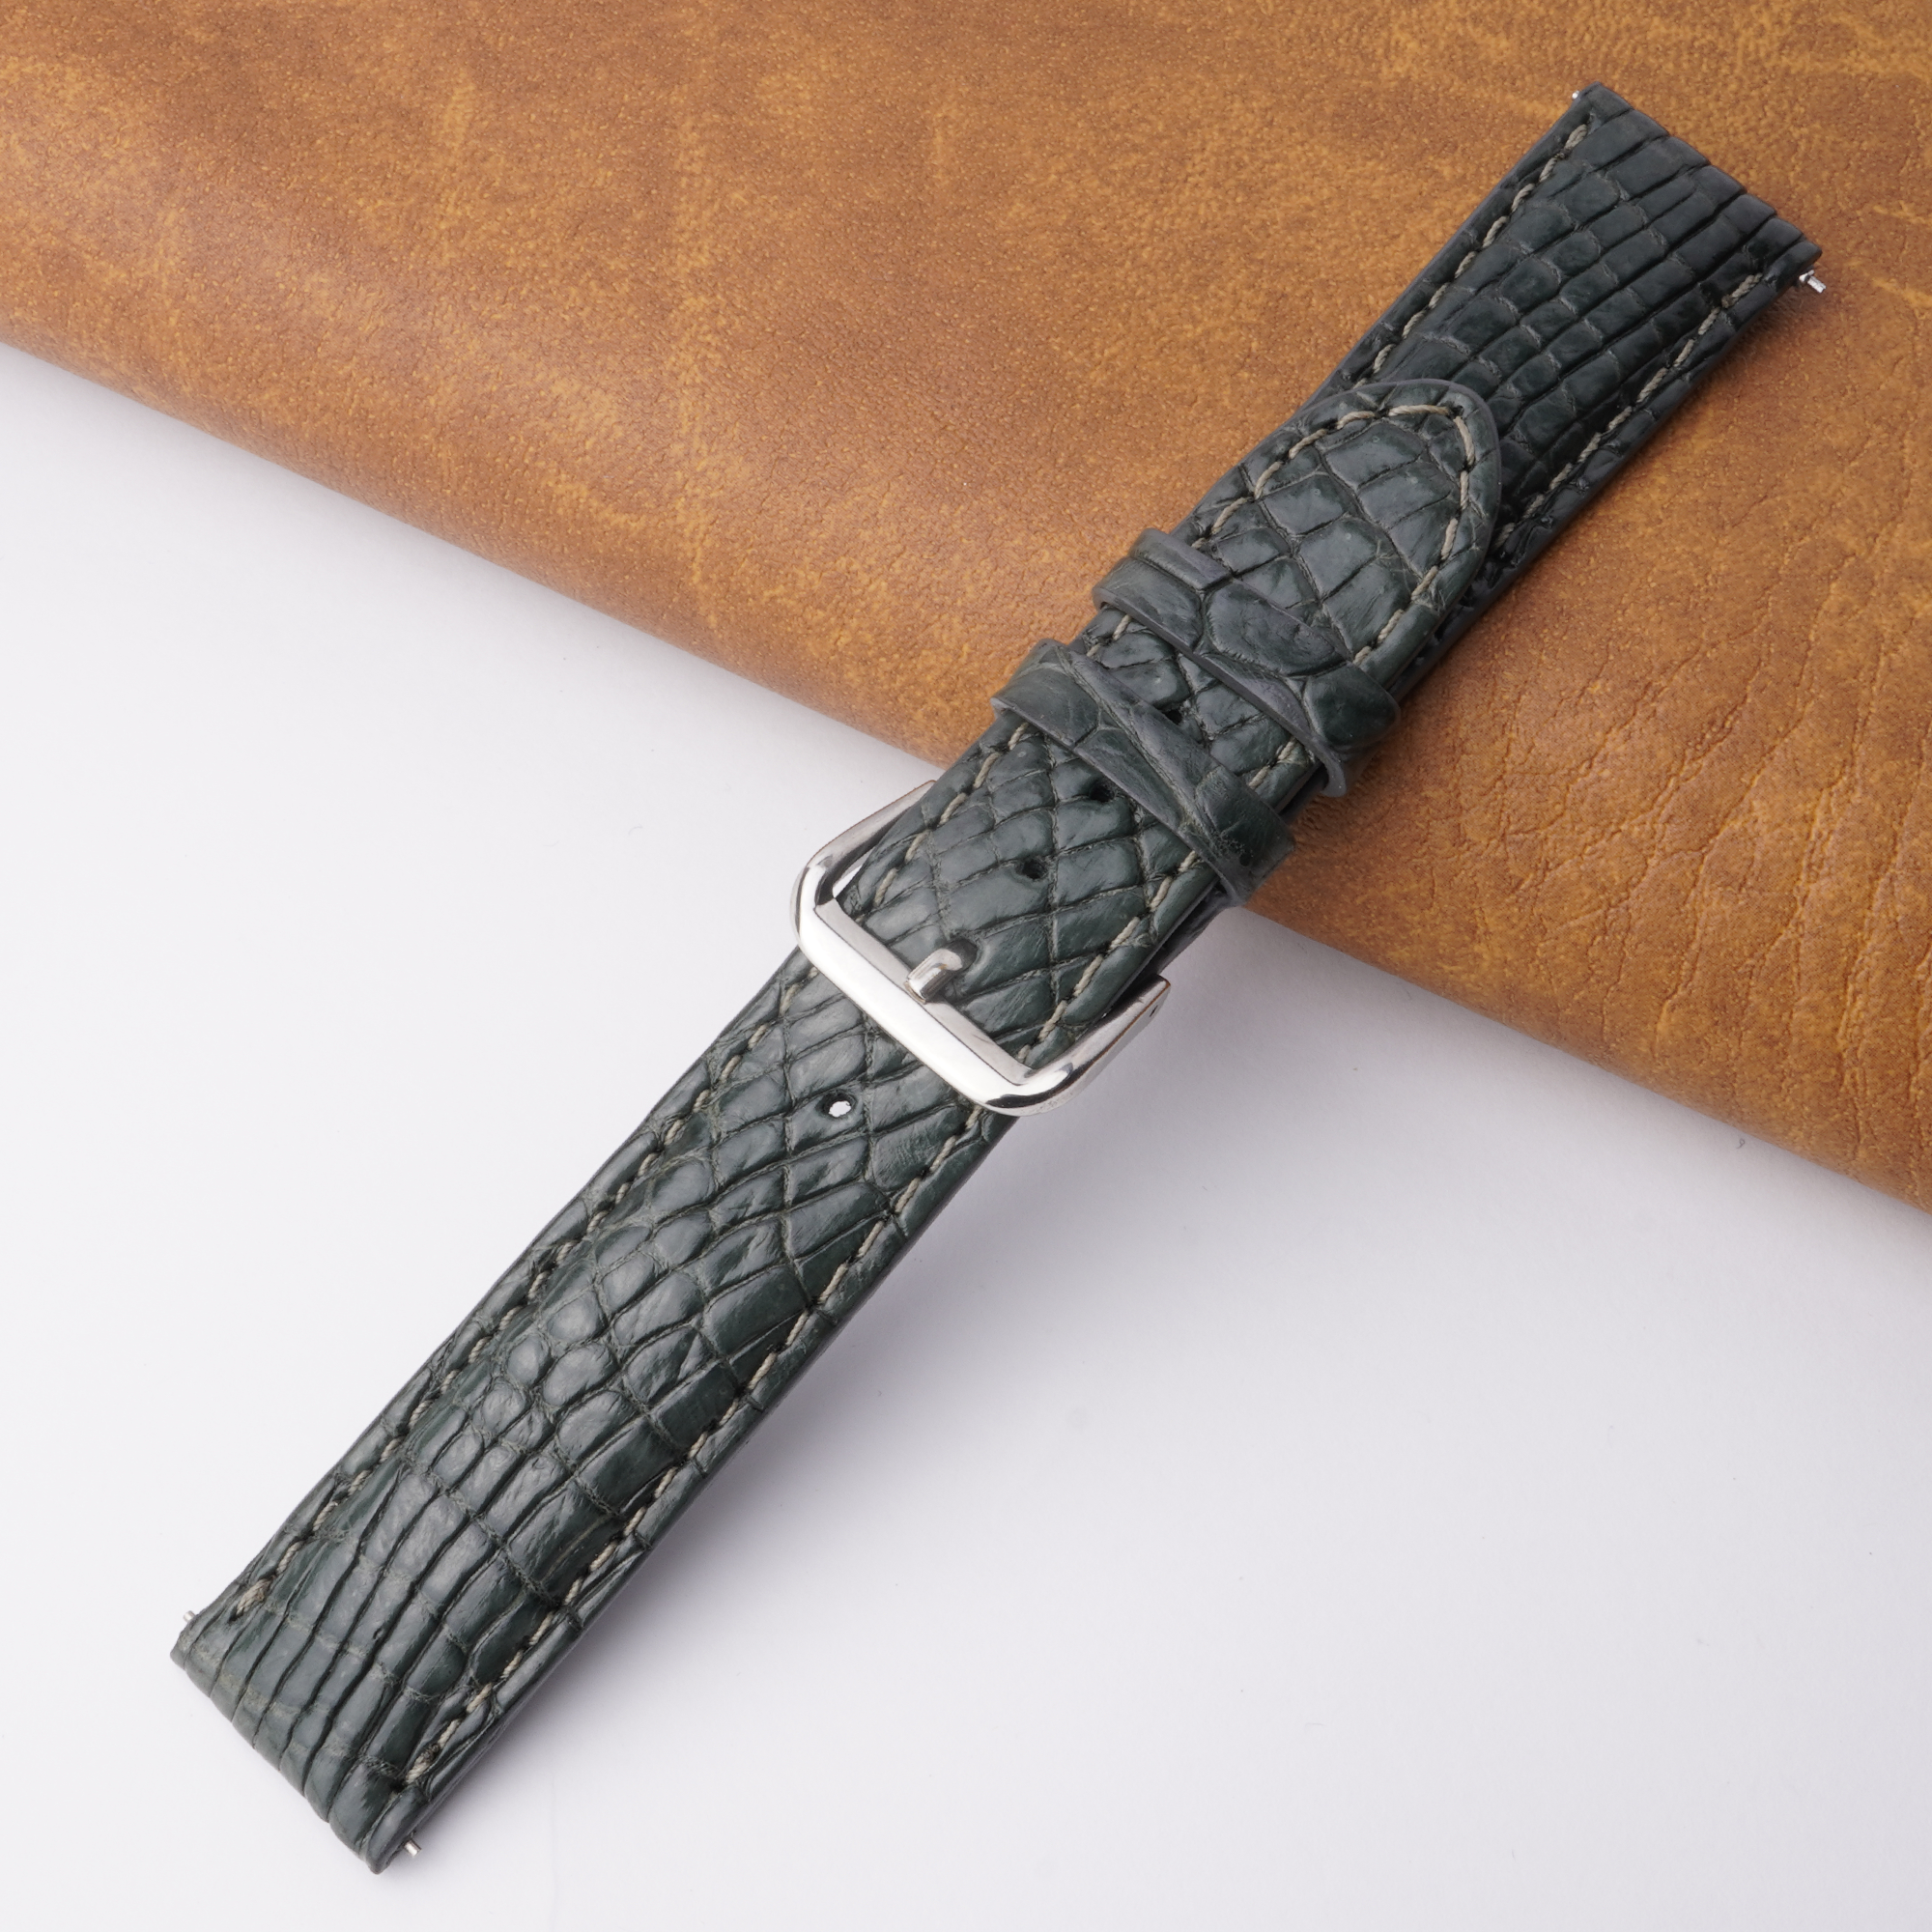 20mm Grey Unique Pattern Alligator Leather Watch Band For Men DH-02C